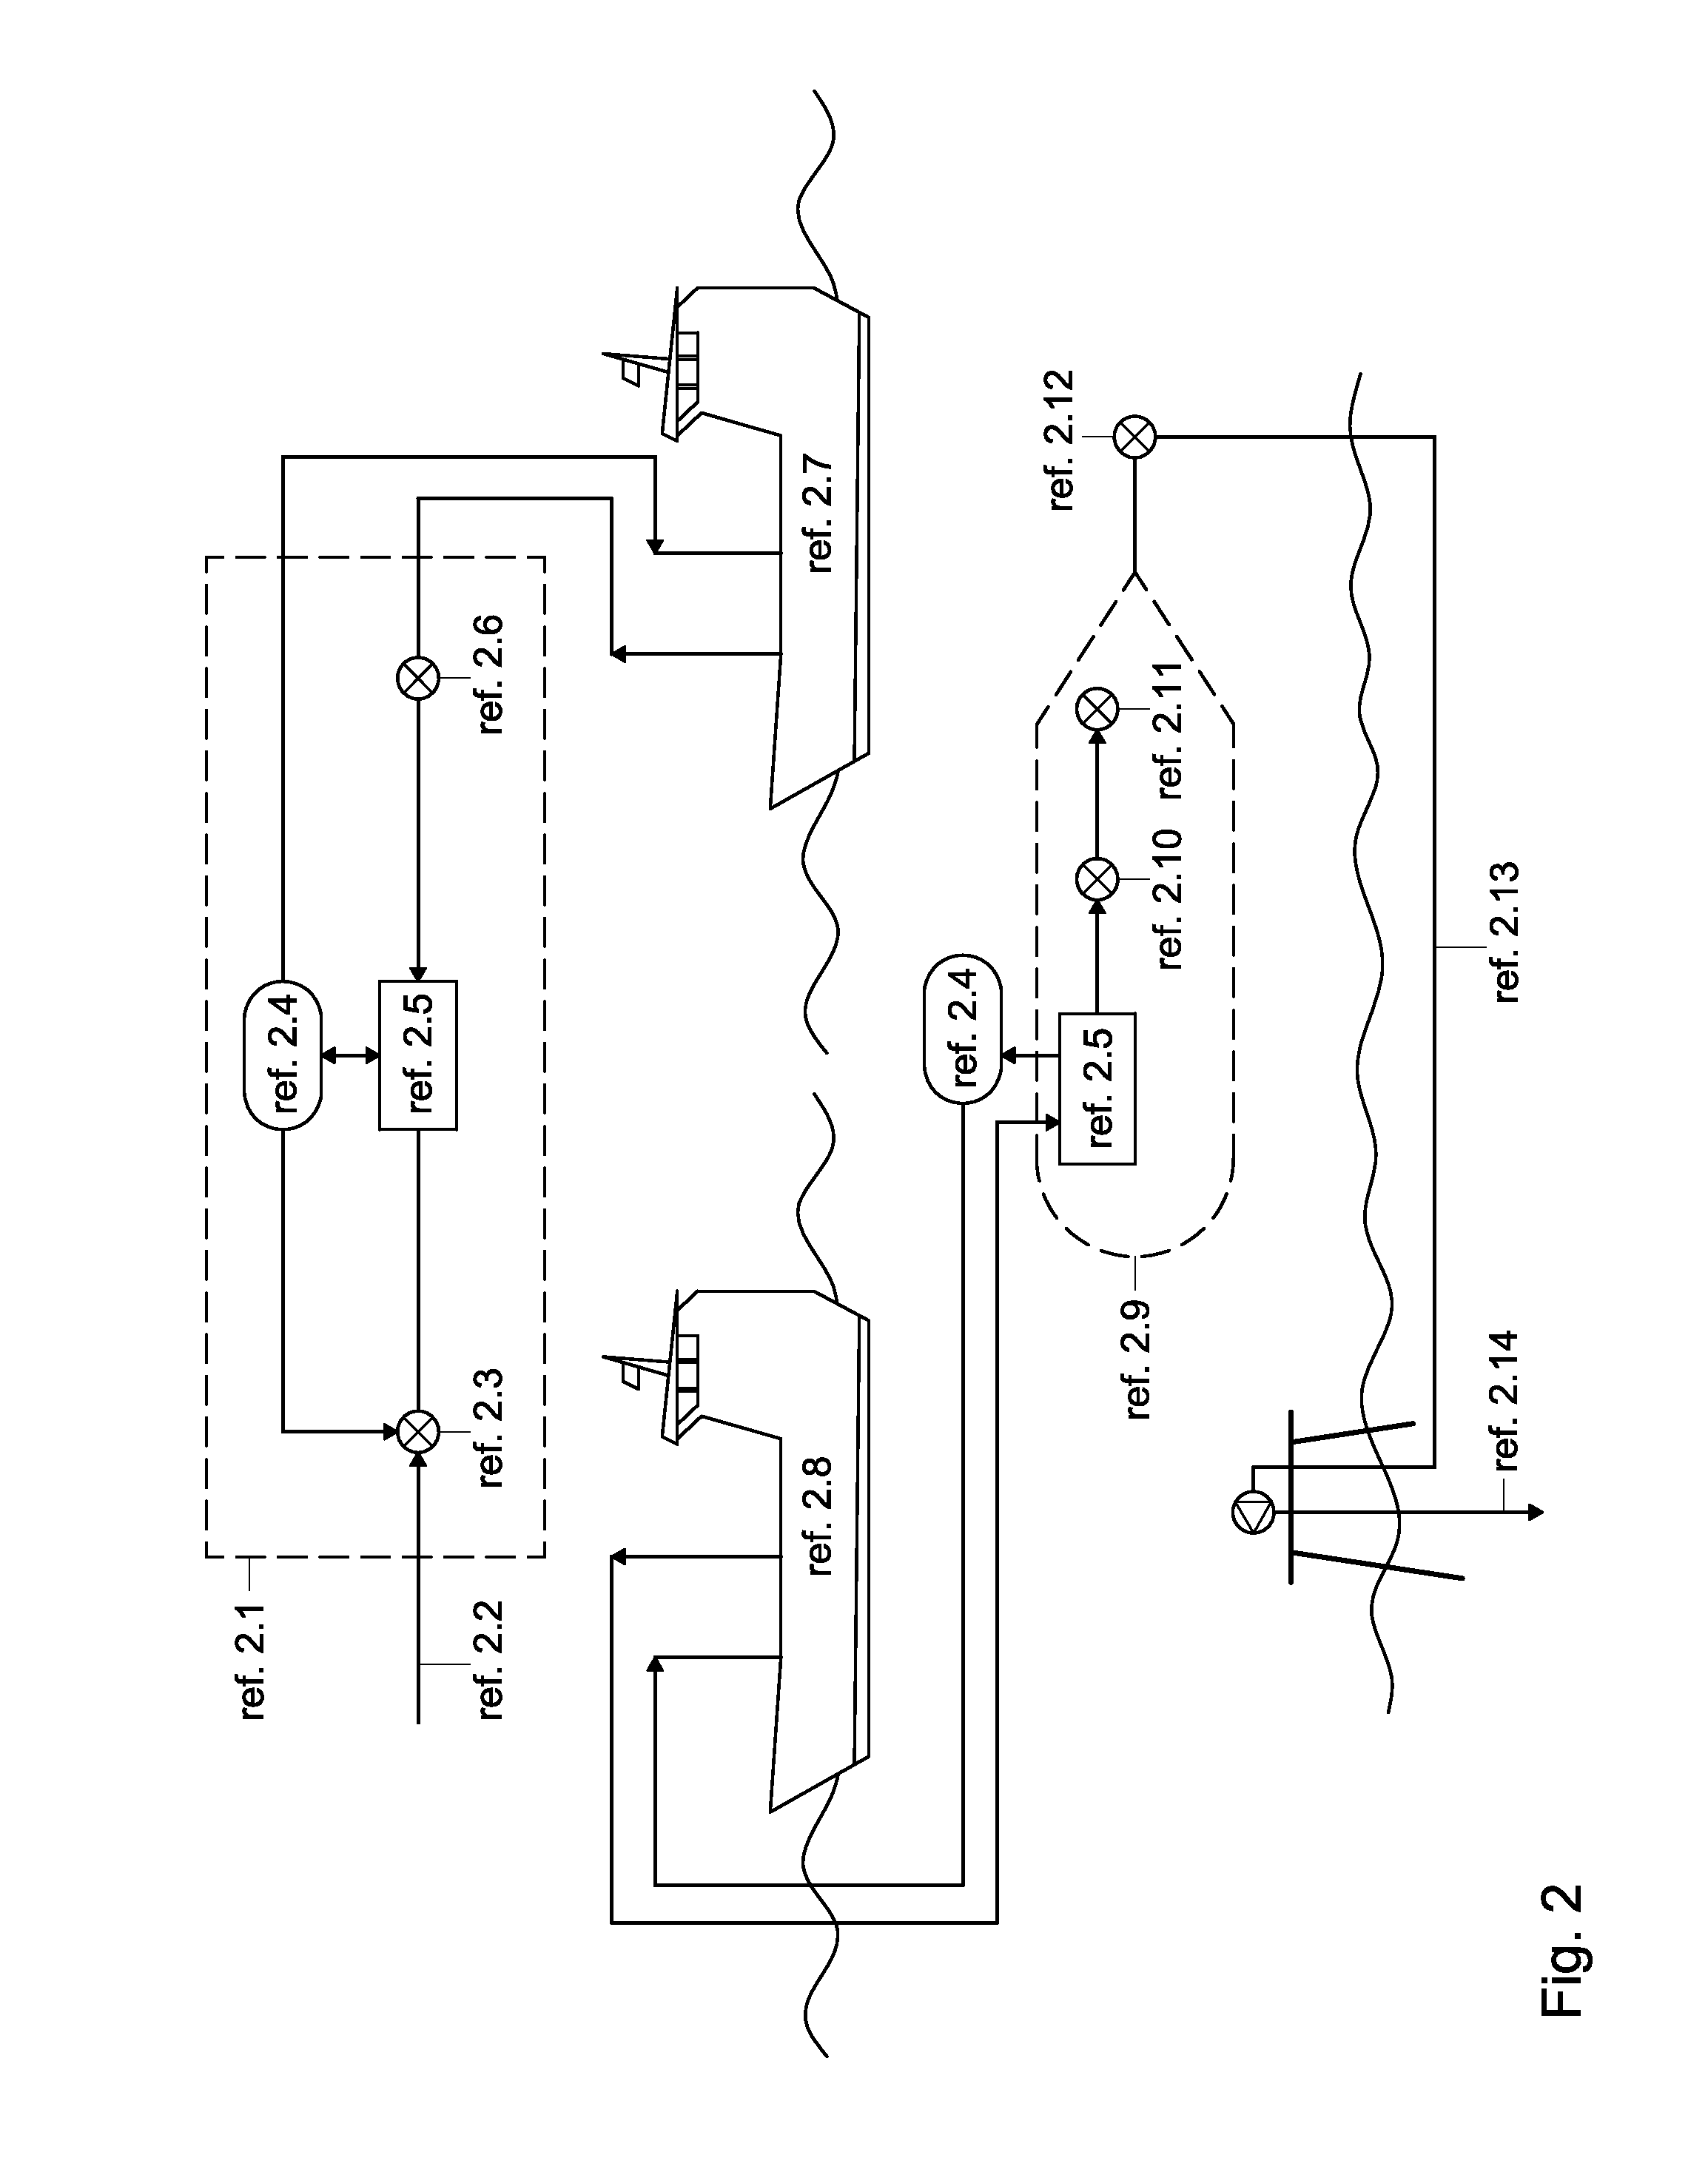 Shipping method for co2 storage and import of cng